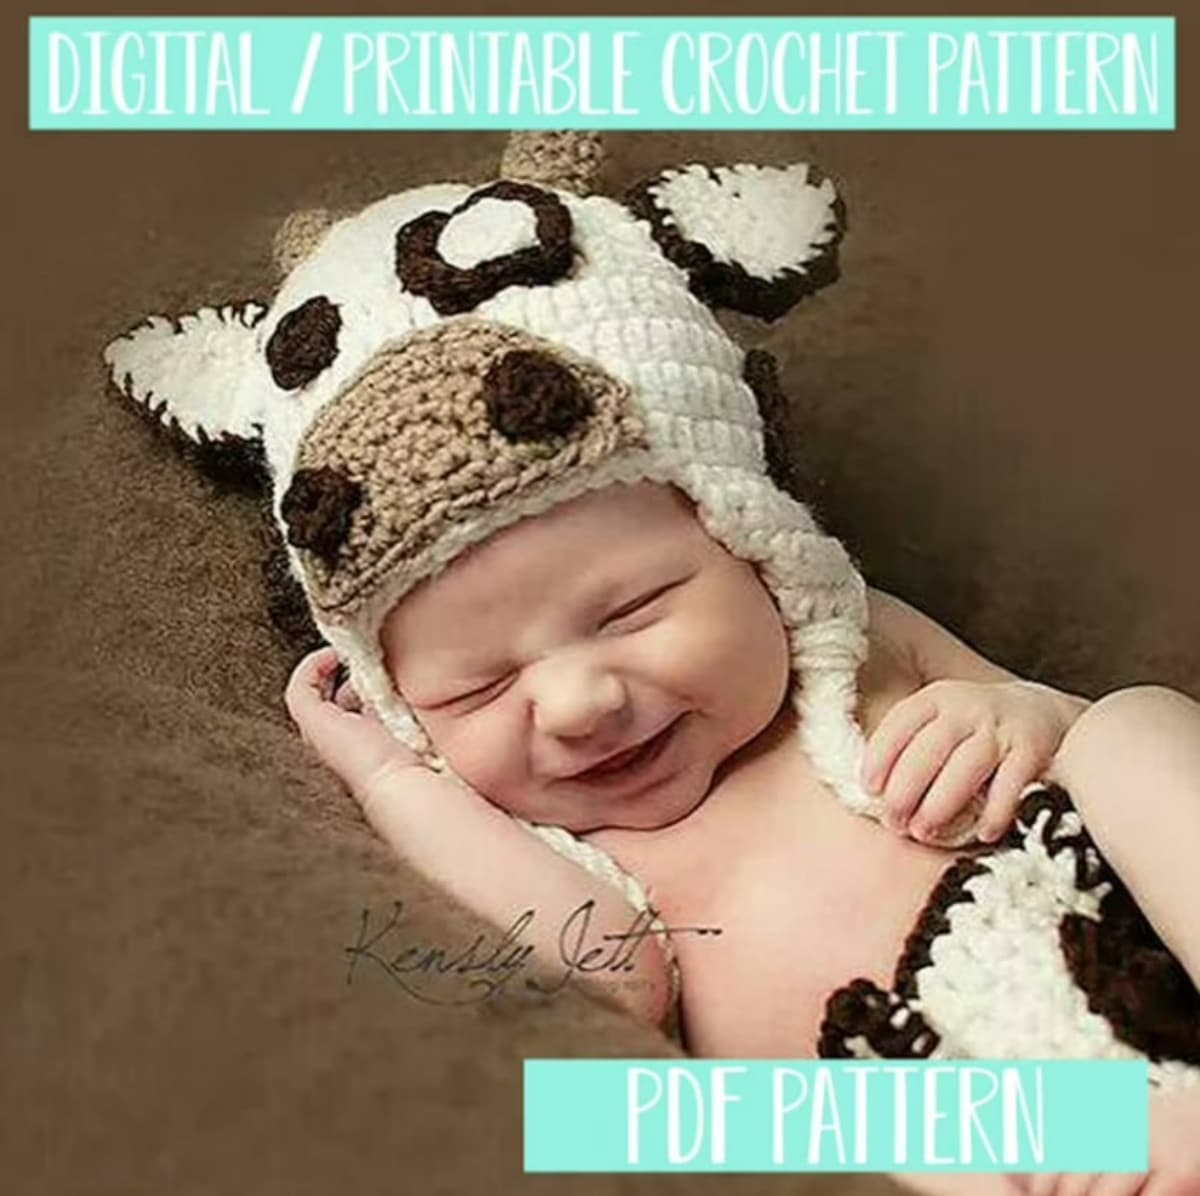 Newborn baby on a brown cushion wearing a white and brown crochet cow’s hat with white earflaps and a matching diaper cover.